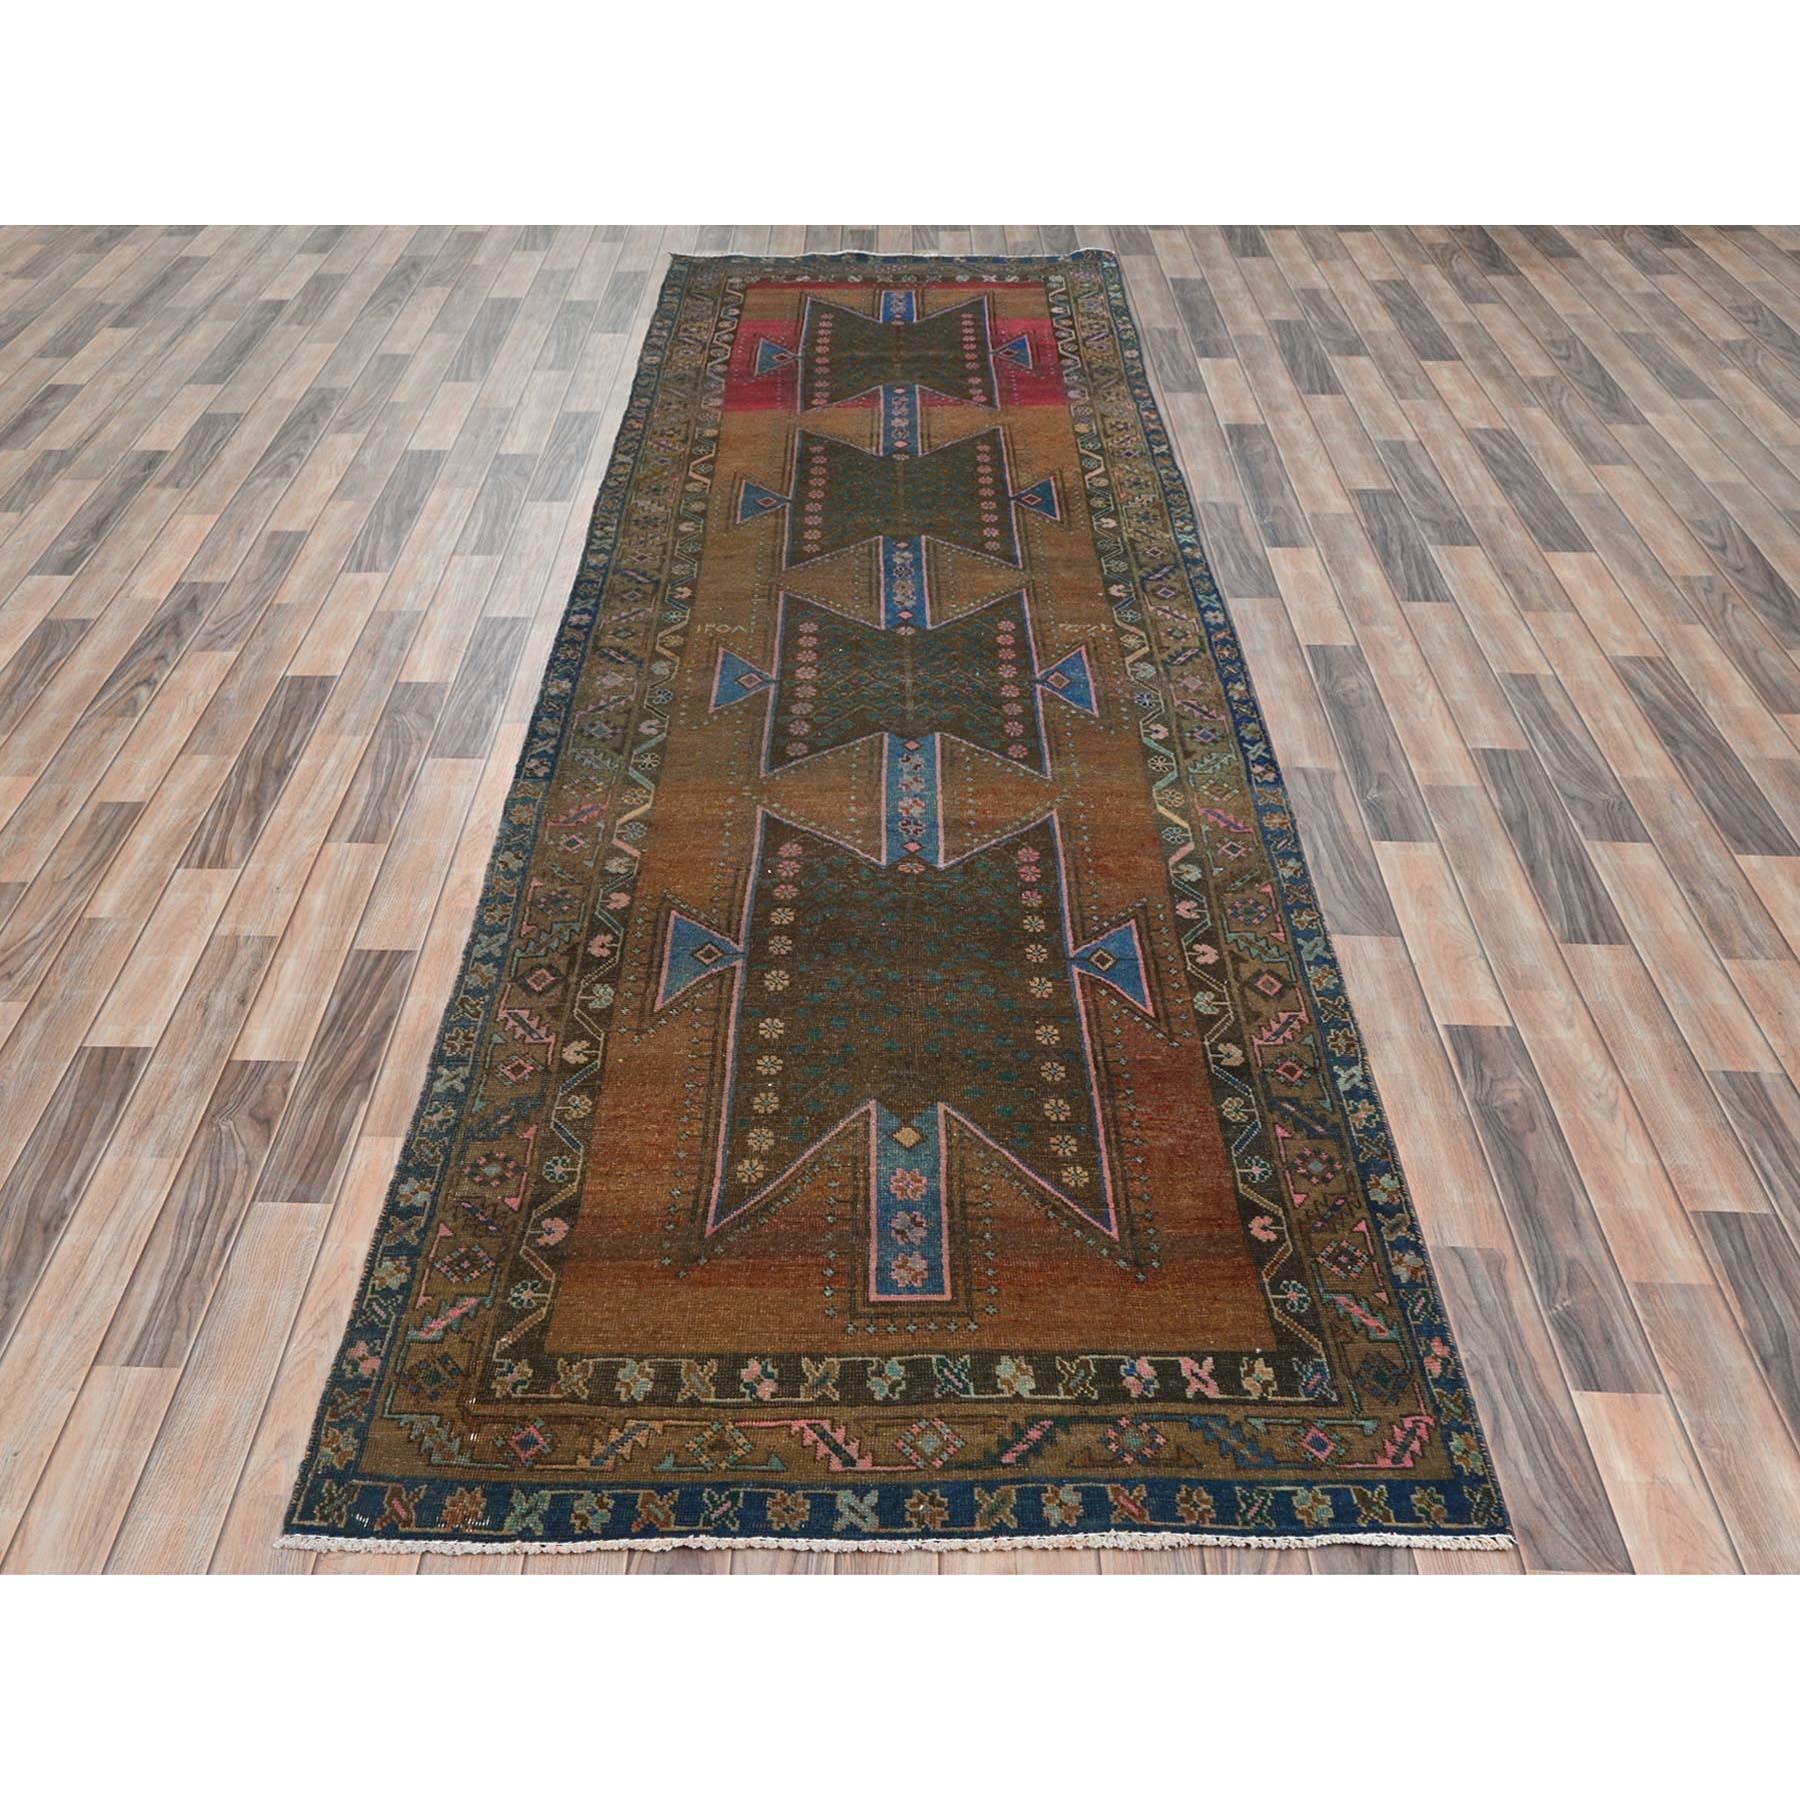 This fabulous hand-knotted carpet has been created and designed for extra strength and durability. This rug has been handcrafted for weeks in the traditional method that is used to make
Exact Rug Size in Feet and Inches : 3'9